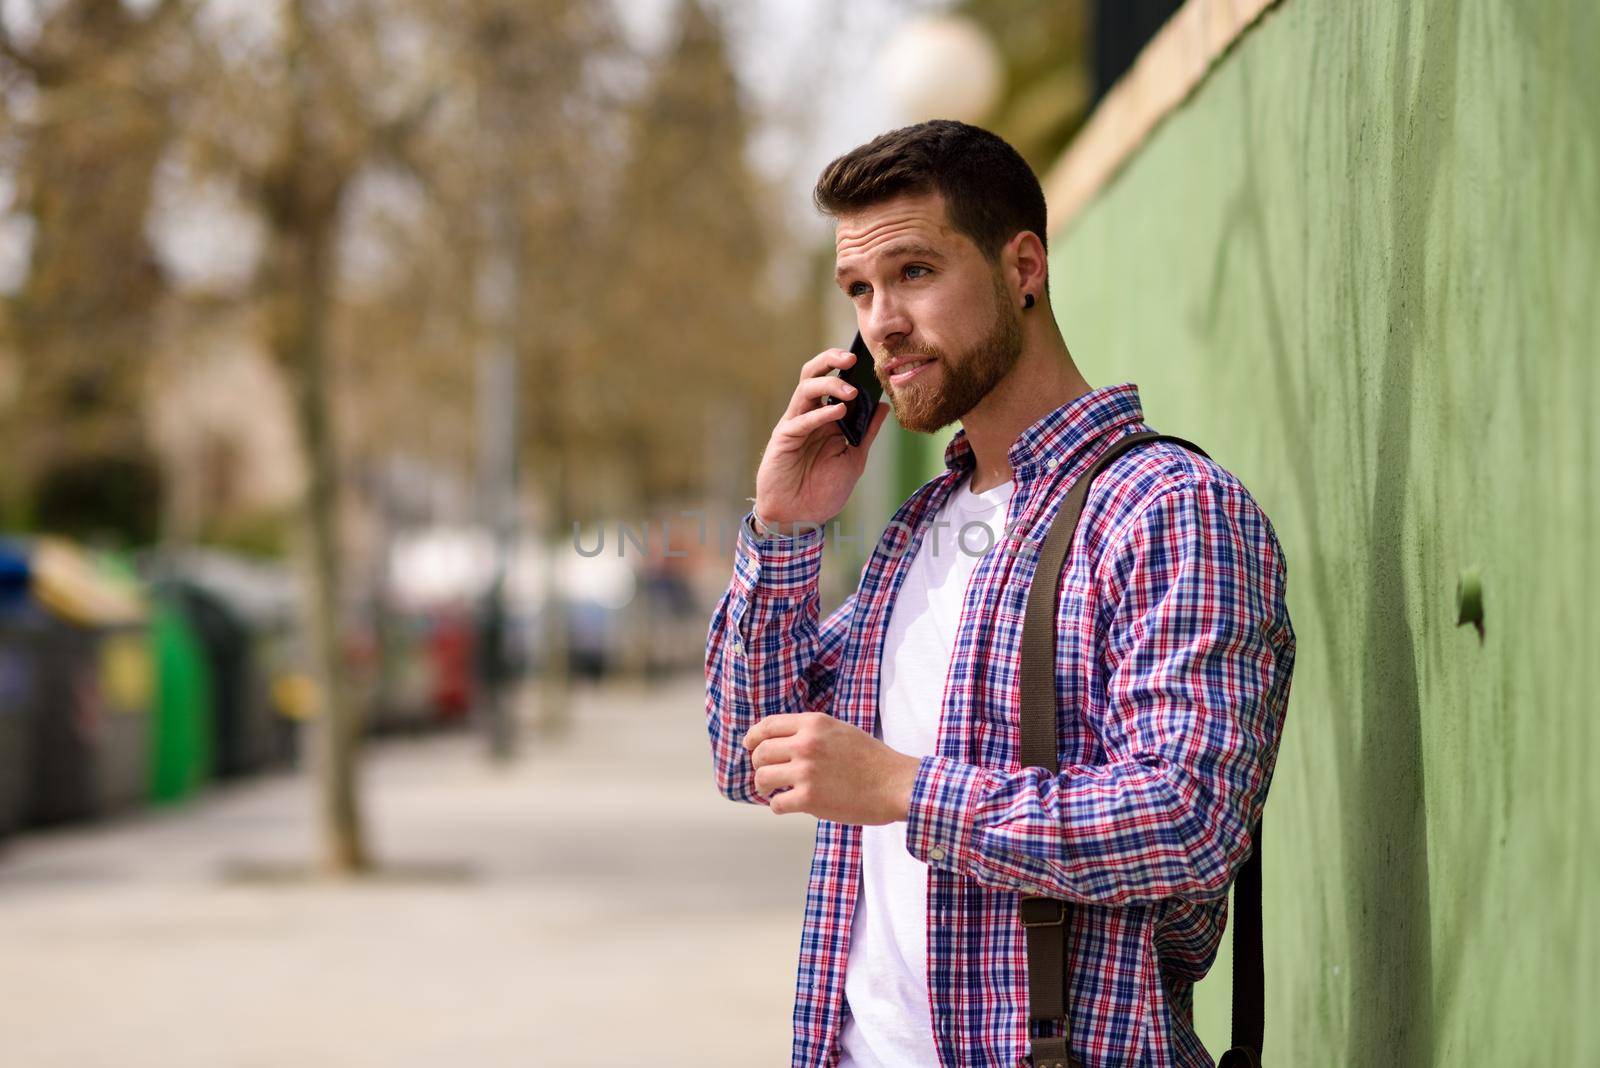 Young man talking with his smart phone in urban background. Guy wearing casual clothes. Lifestyle concept.